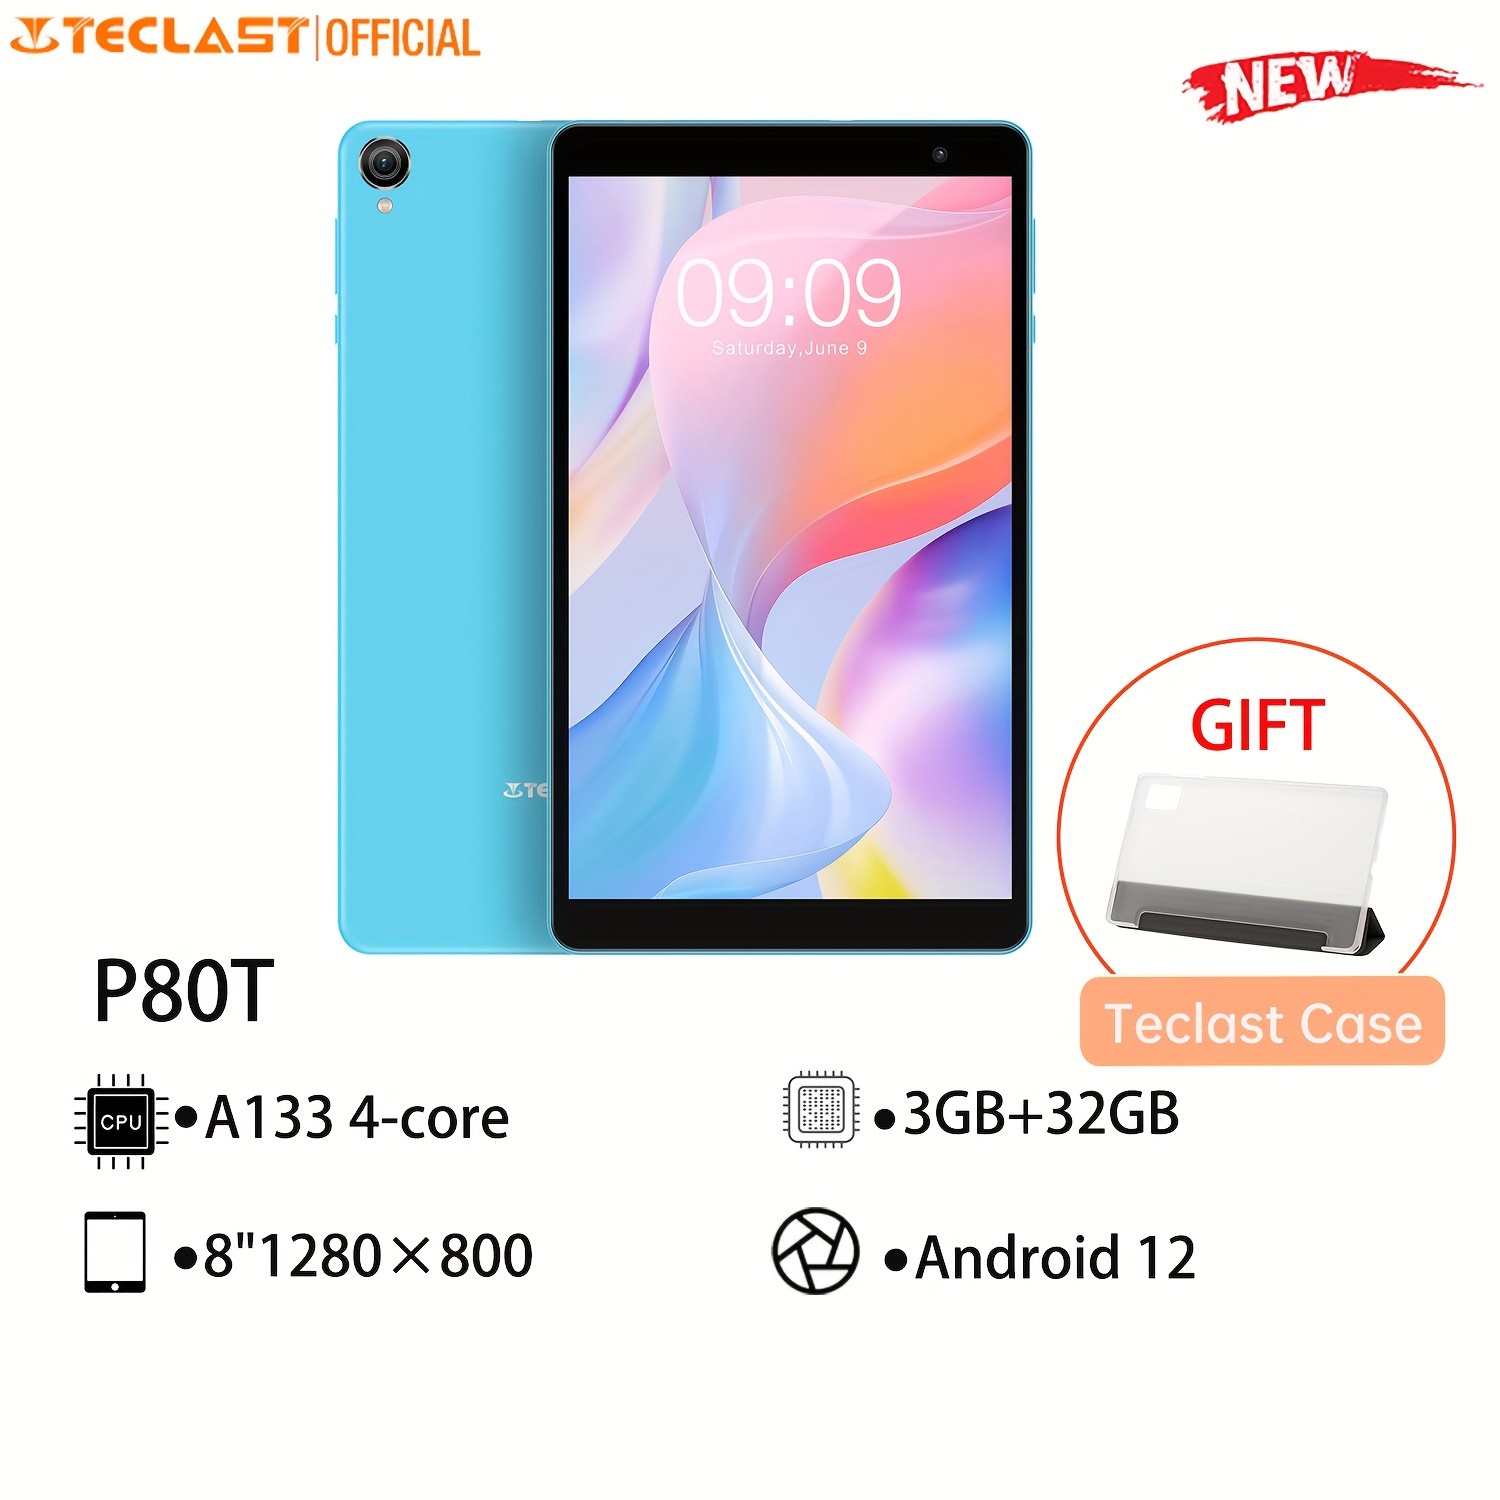 Teclast P80T Tablet PC 3+32GB 8'' IPS HD Display Wi-Fi 6 Quad Core For  Android 12 Support Micro SD Expansion One Free Case